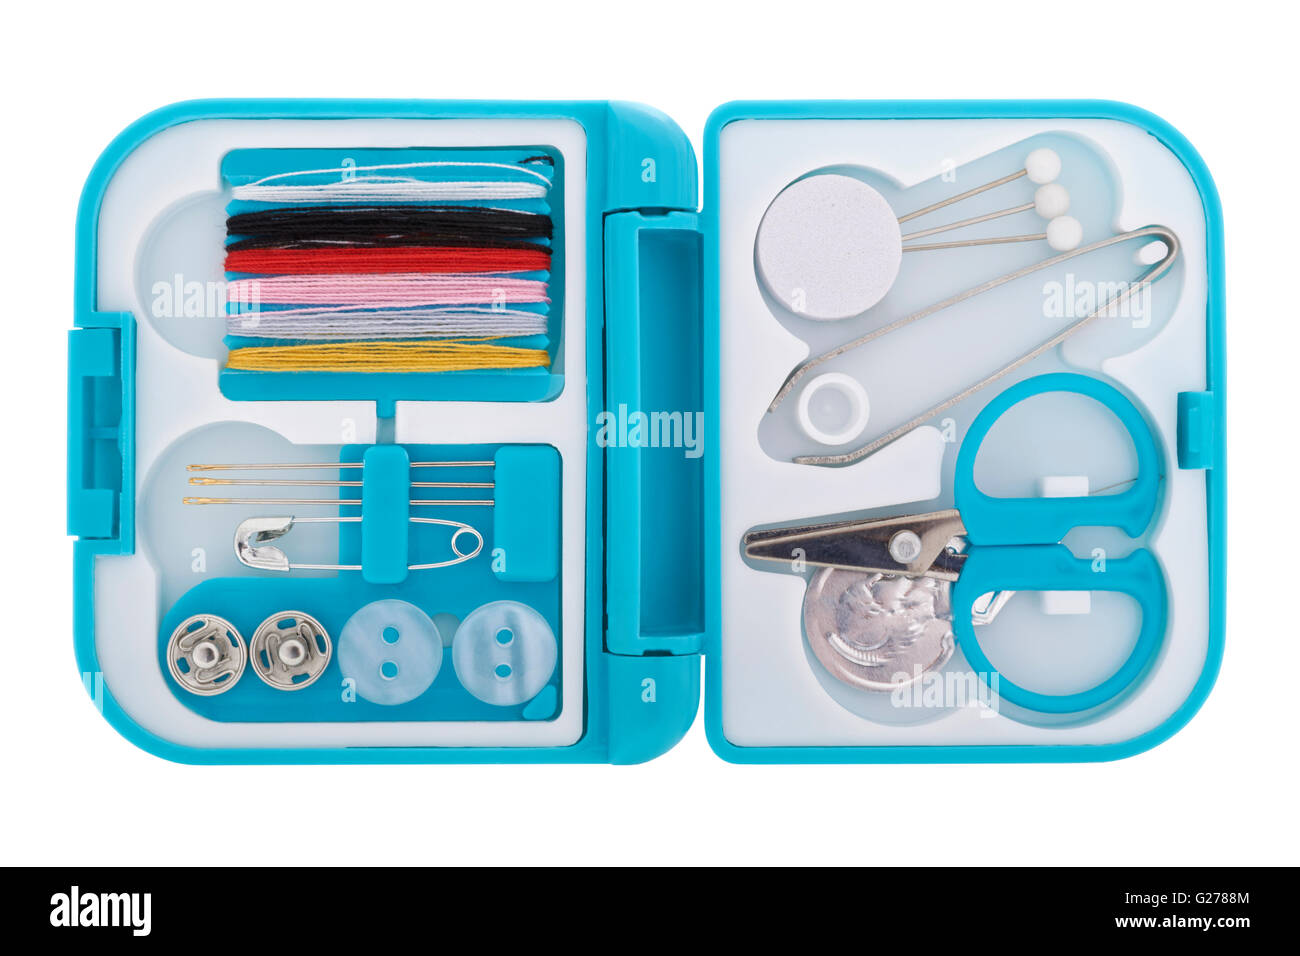 Compact Travel Sewing Kit - White